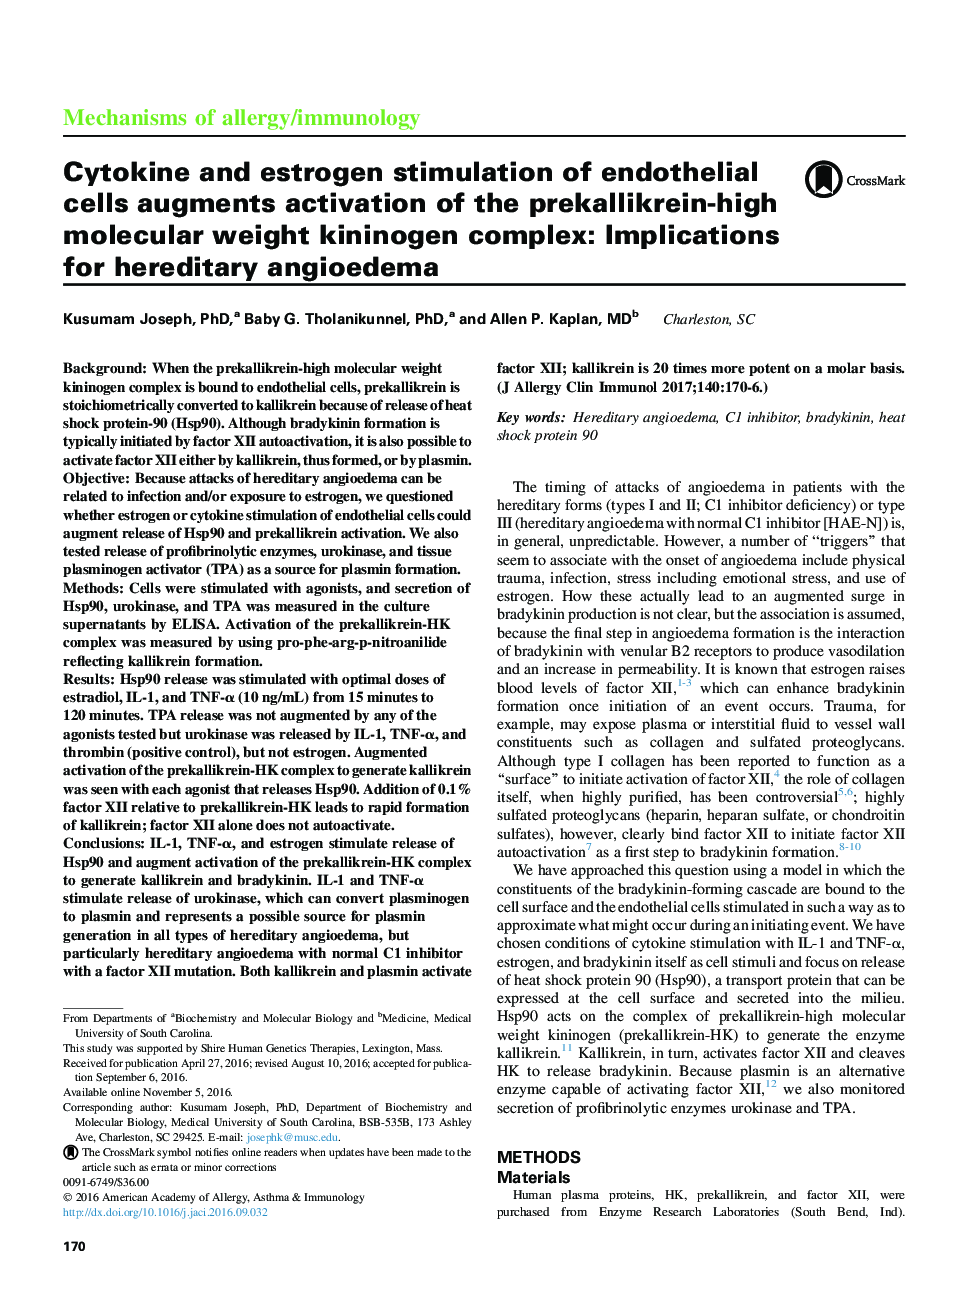 Cytokine and estrogen stimulation of endothelial cells augments activation of the prekallikrein-high molecular weight kininogen complex: Implications for hereditary angioedema